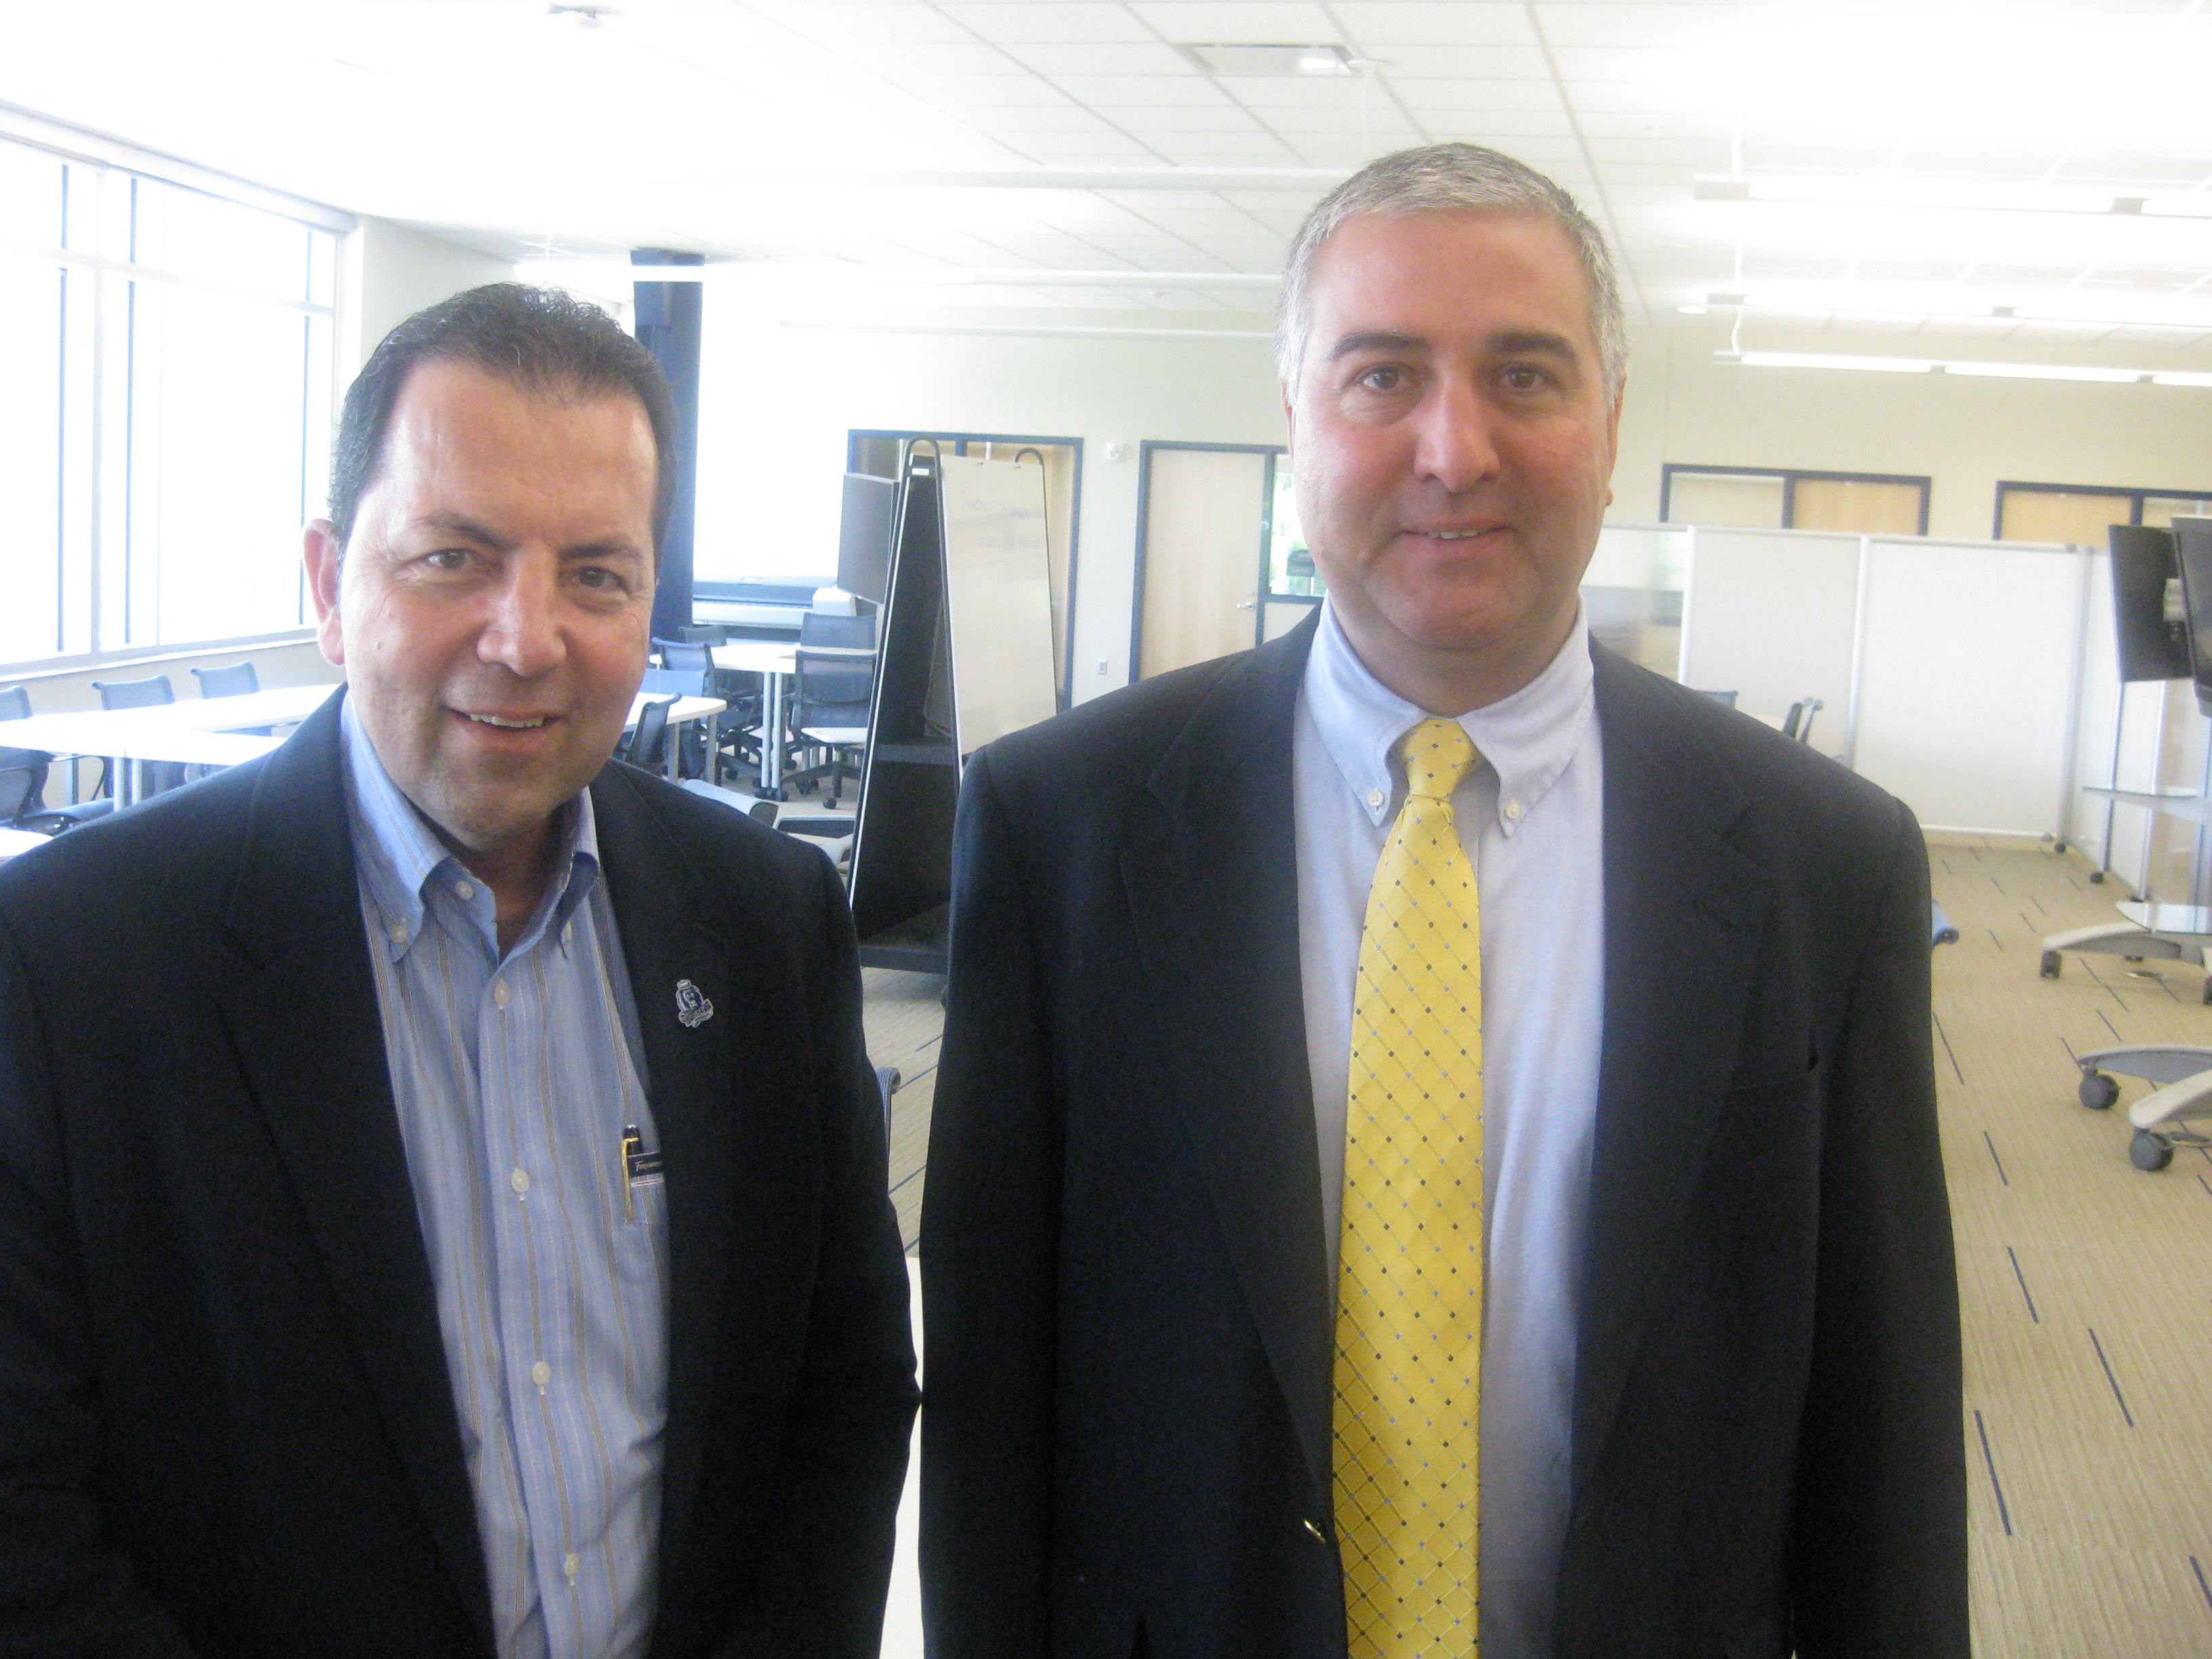 Joseph Moody, CEO of the Commonwealth Center for Advanced Manufacturing, and Oktay Baysal, dean of the Frank Batten College of Engineering and Technology